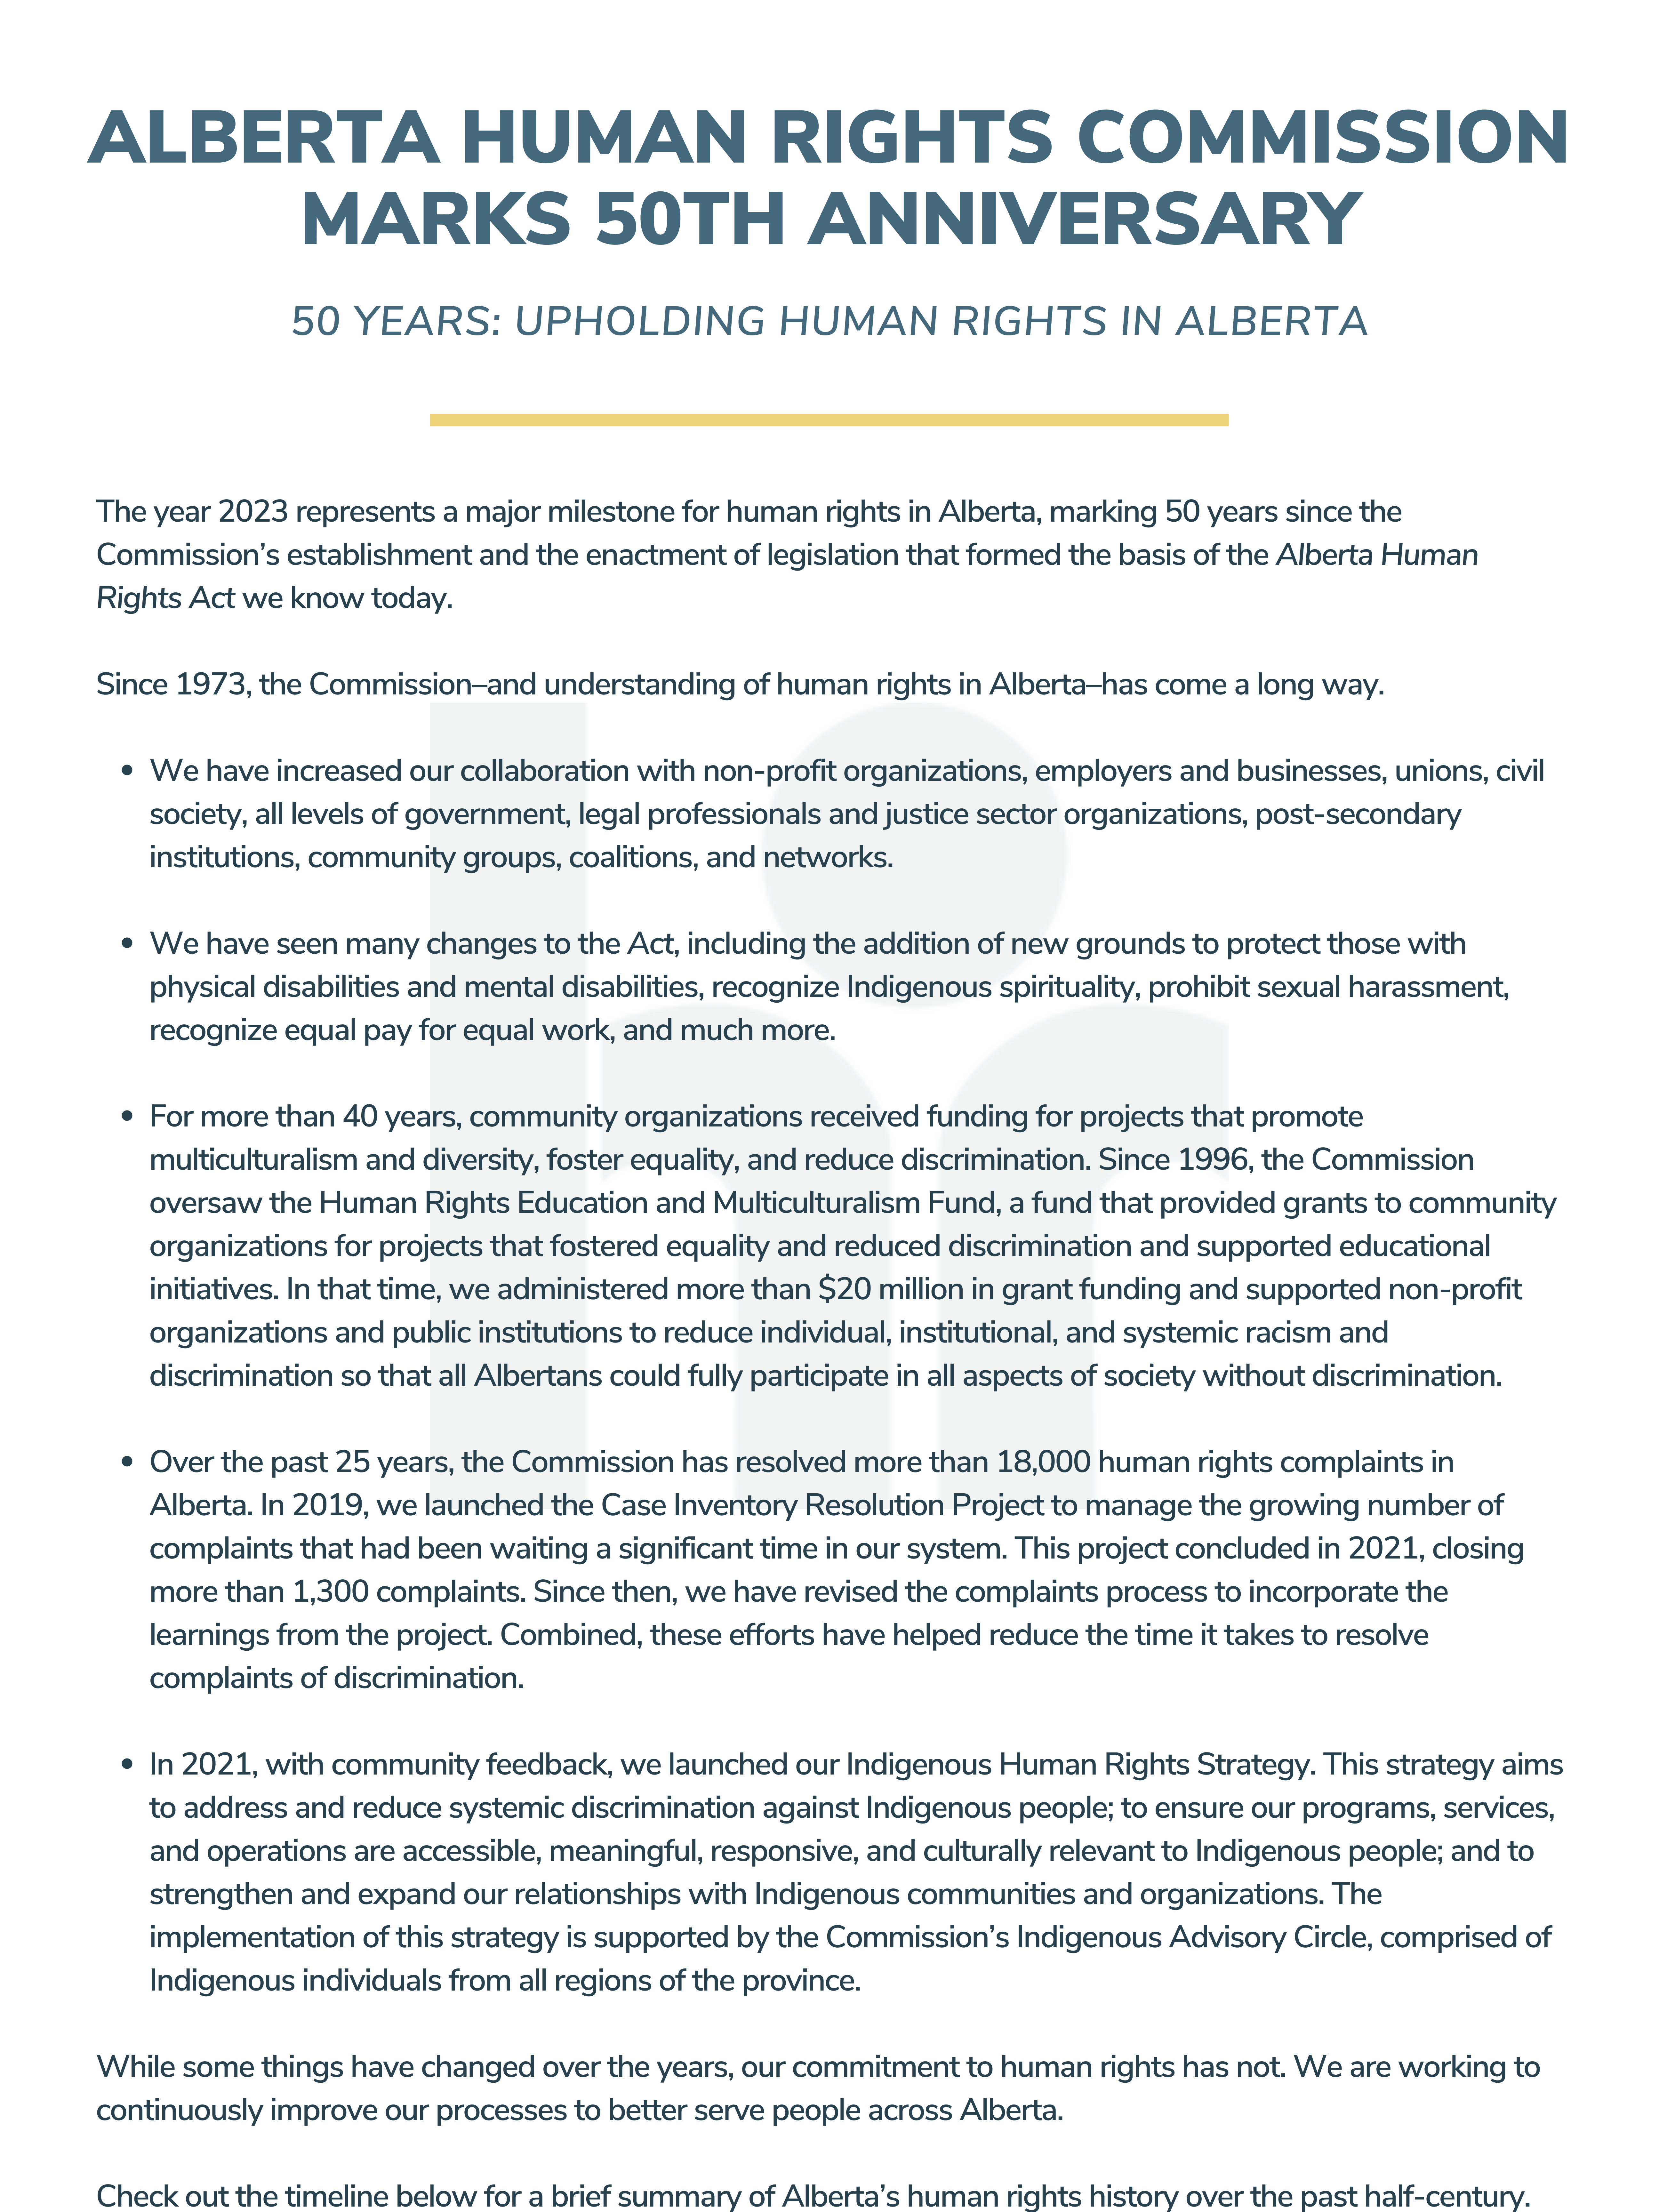 Title and copy describing Alberta Human Rights Commission marking its 50th Anniversary and upholding human rights in Alberta. See link at top of page for full text.